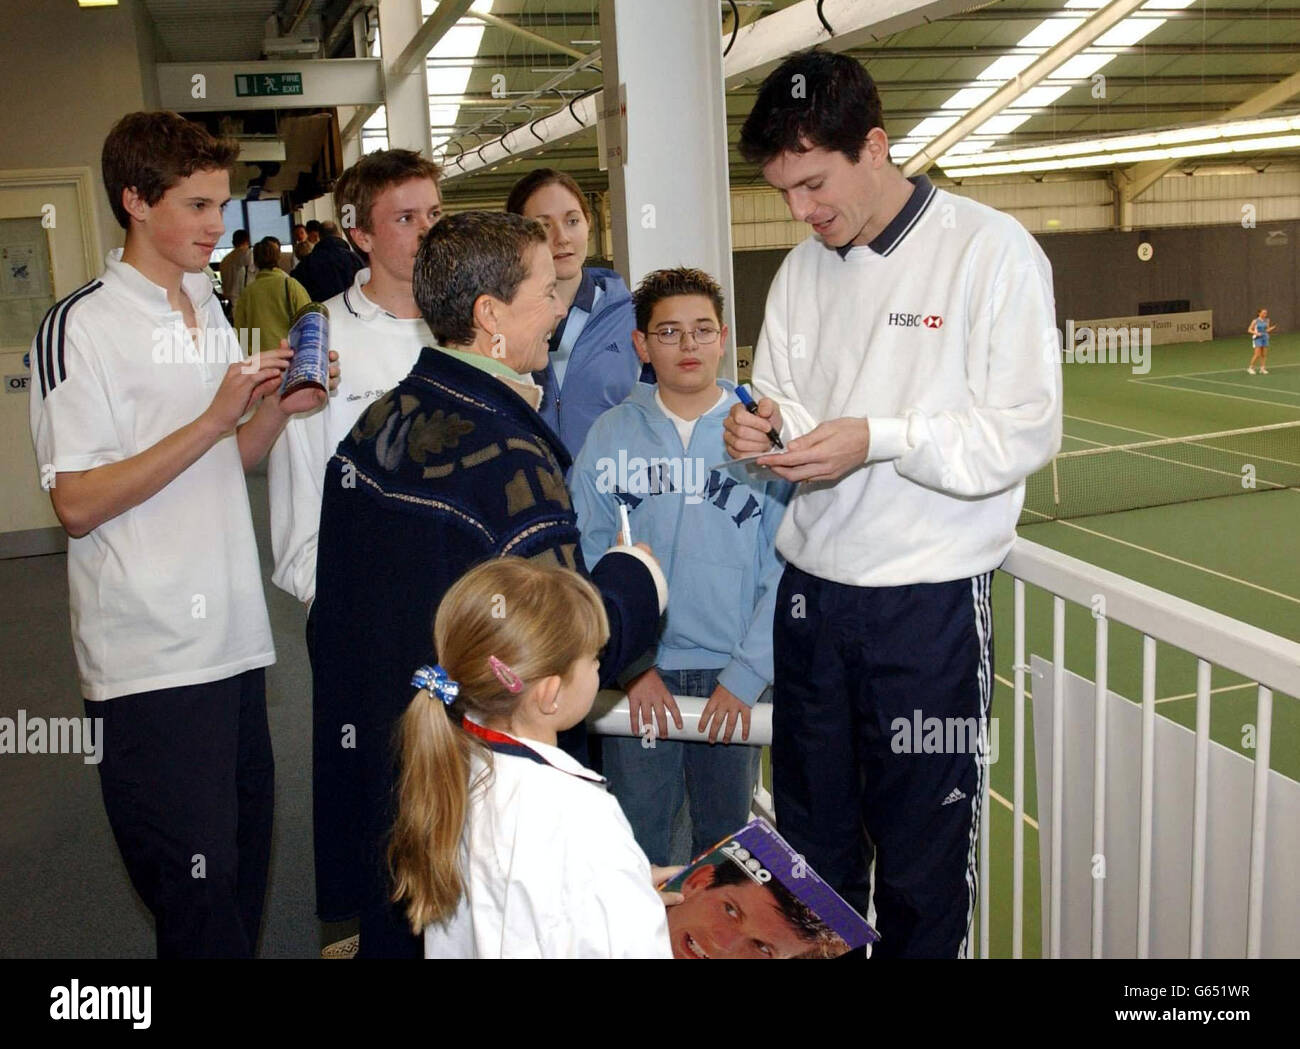 British tennis star Tim Henman signs autographs as he watches the play during the National Finals of the HSBC/British Schools Tennis Team Competitions 2002 at the Redbridge Sports Centre in Barkingside, Essex. Stock Photo